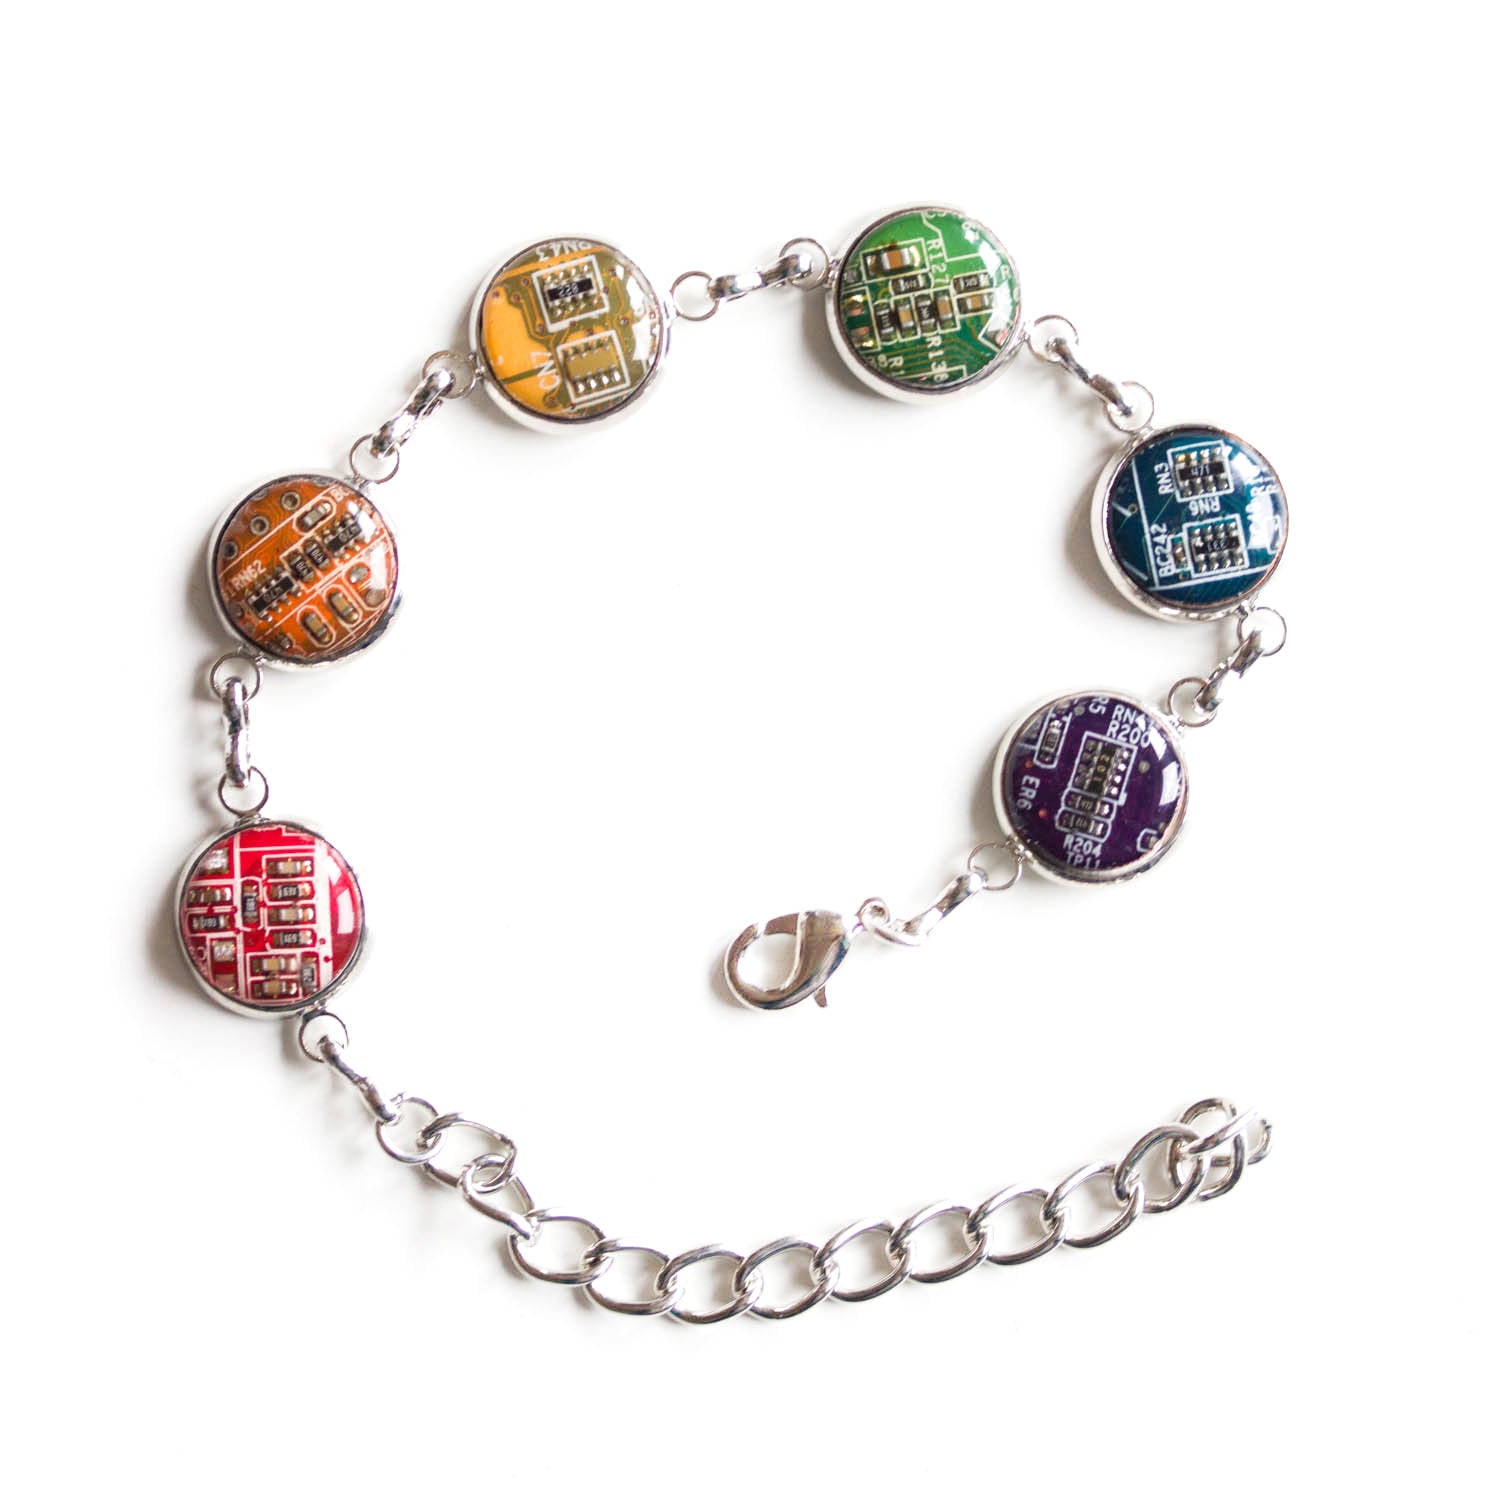 Colorful bracelet made with recycled circuit board